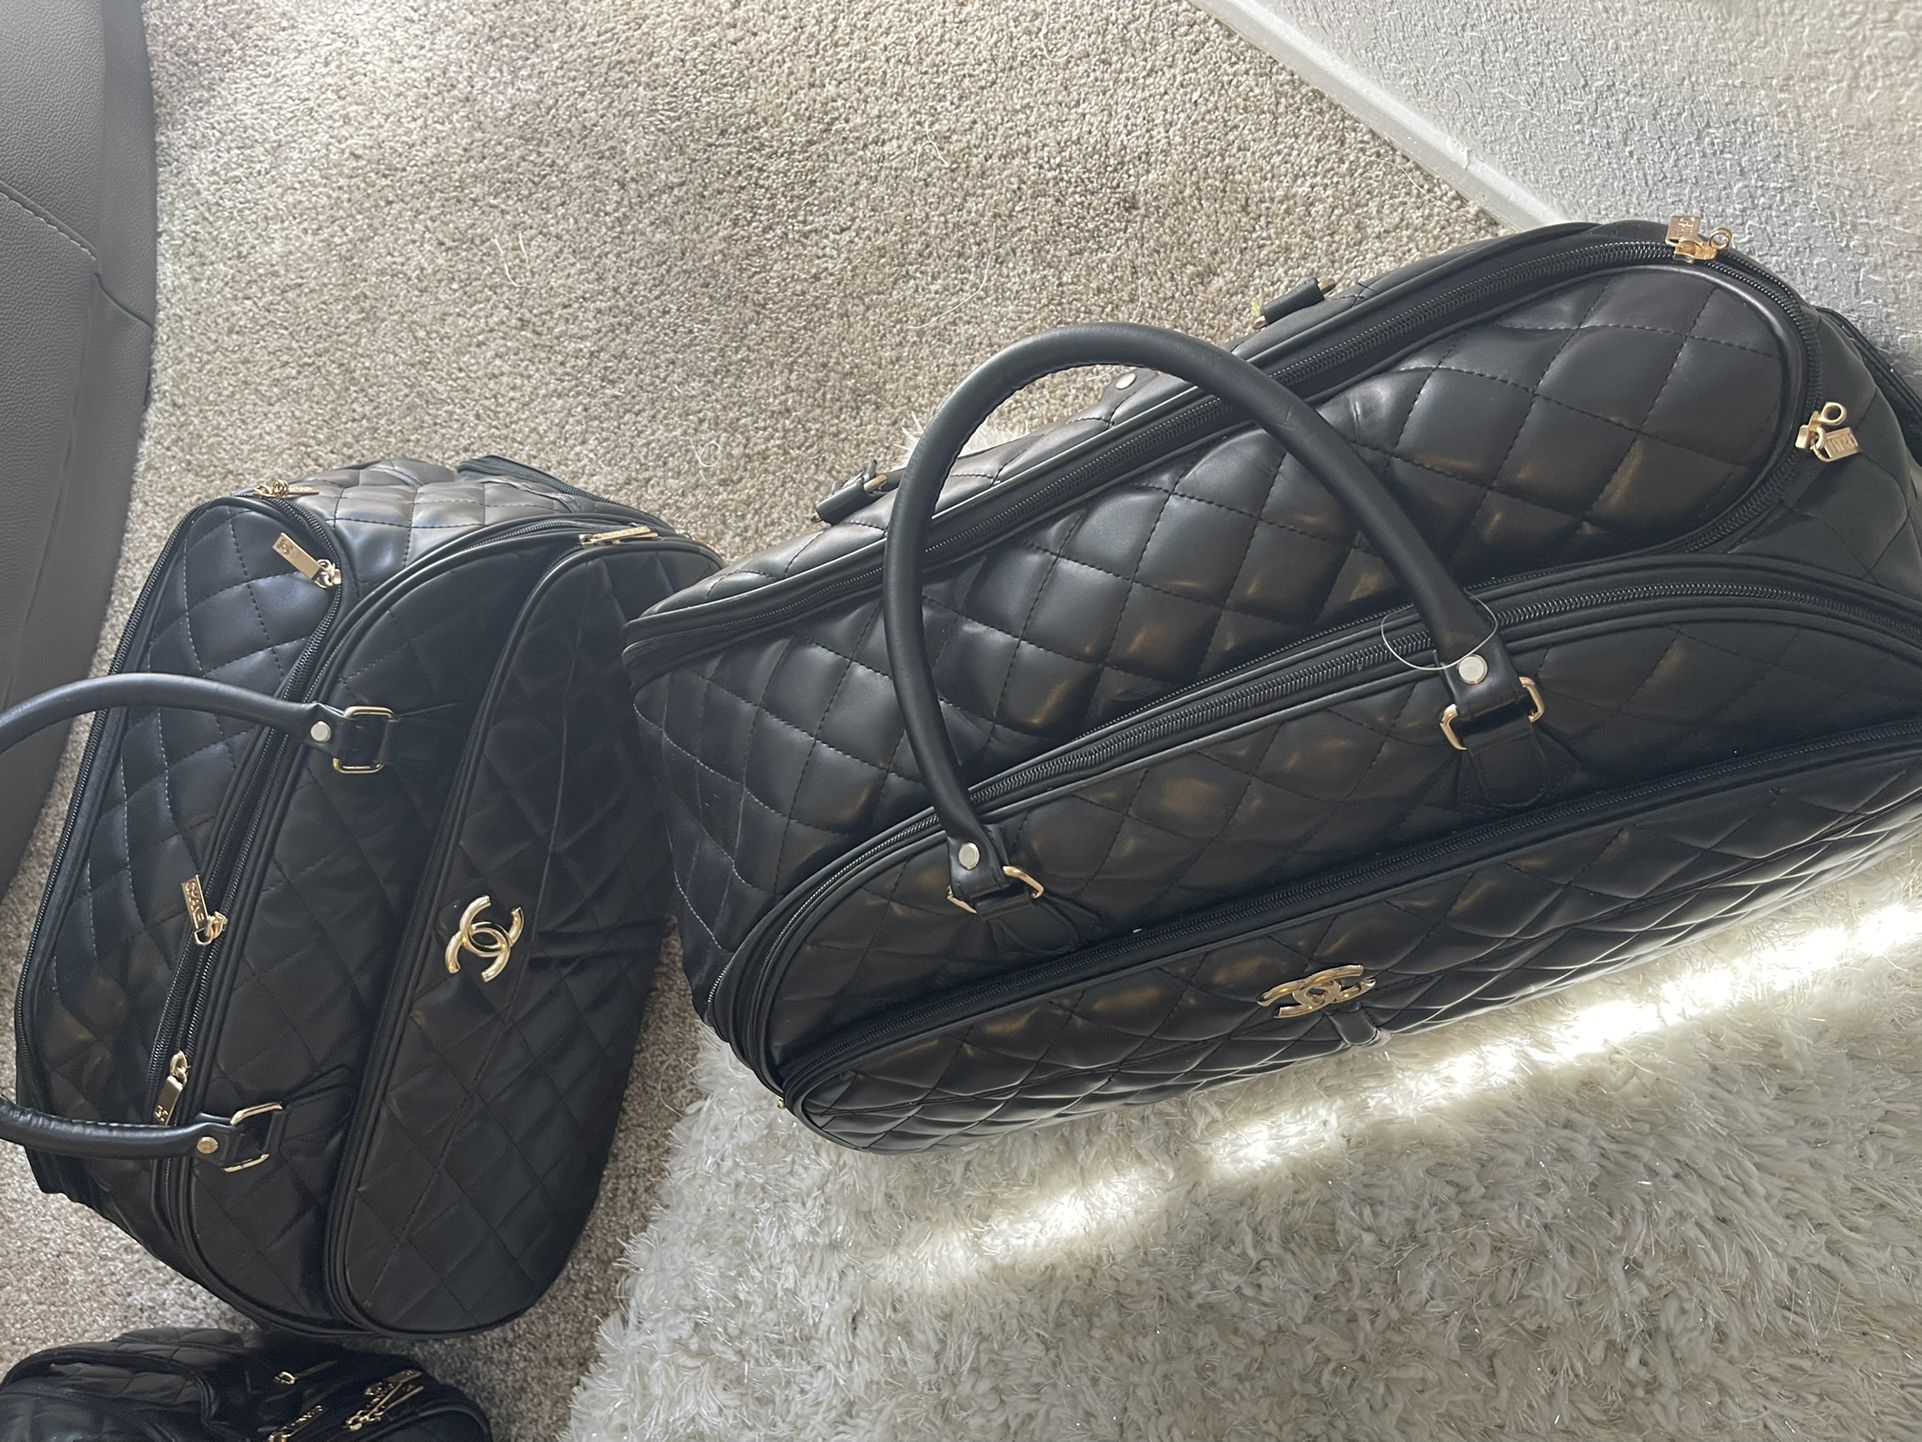 Chanel 3 pc luggage set for Sale in San Diego, CA - OfferUp